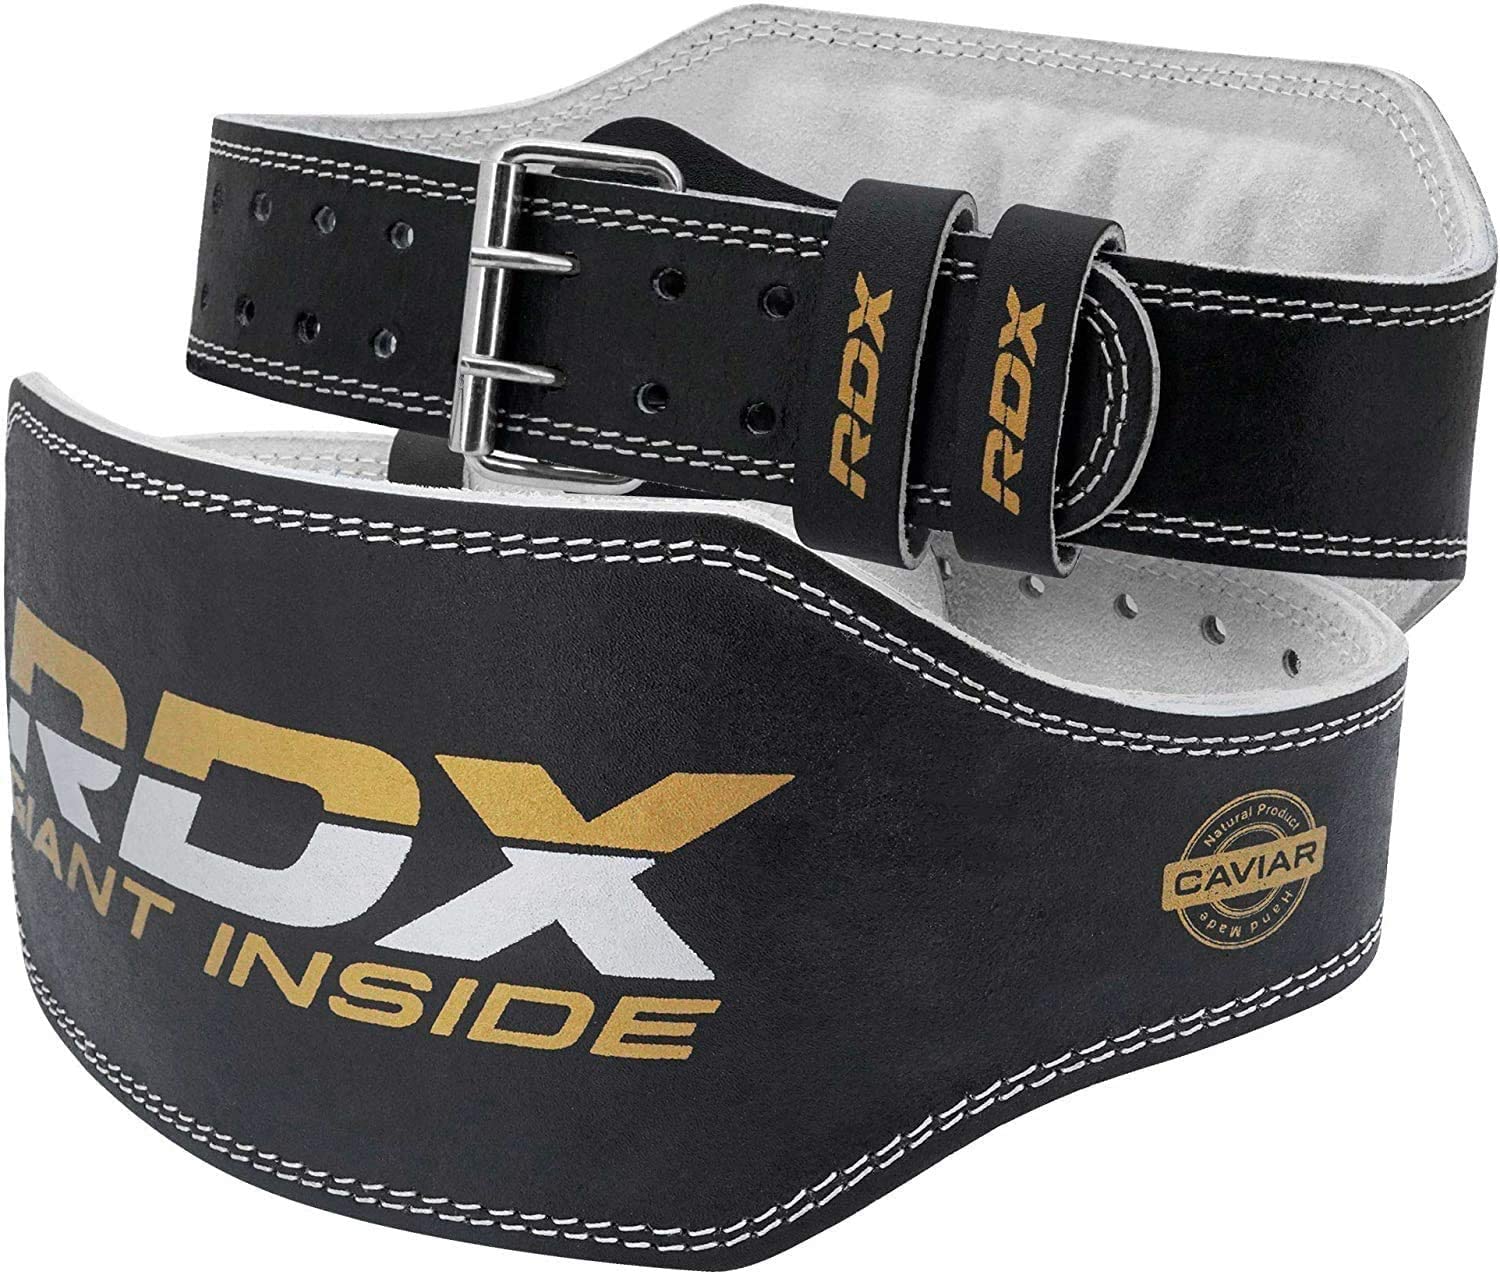 RDX Weight Lifting Belt for Fitness Gym Adjustable Leather Belt 6" Padded Lumbar Back Support Great for Bodybuilding, Powerlifting, Deadlifts Men Workout, Squats Exercise